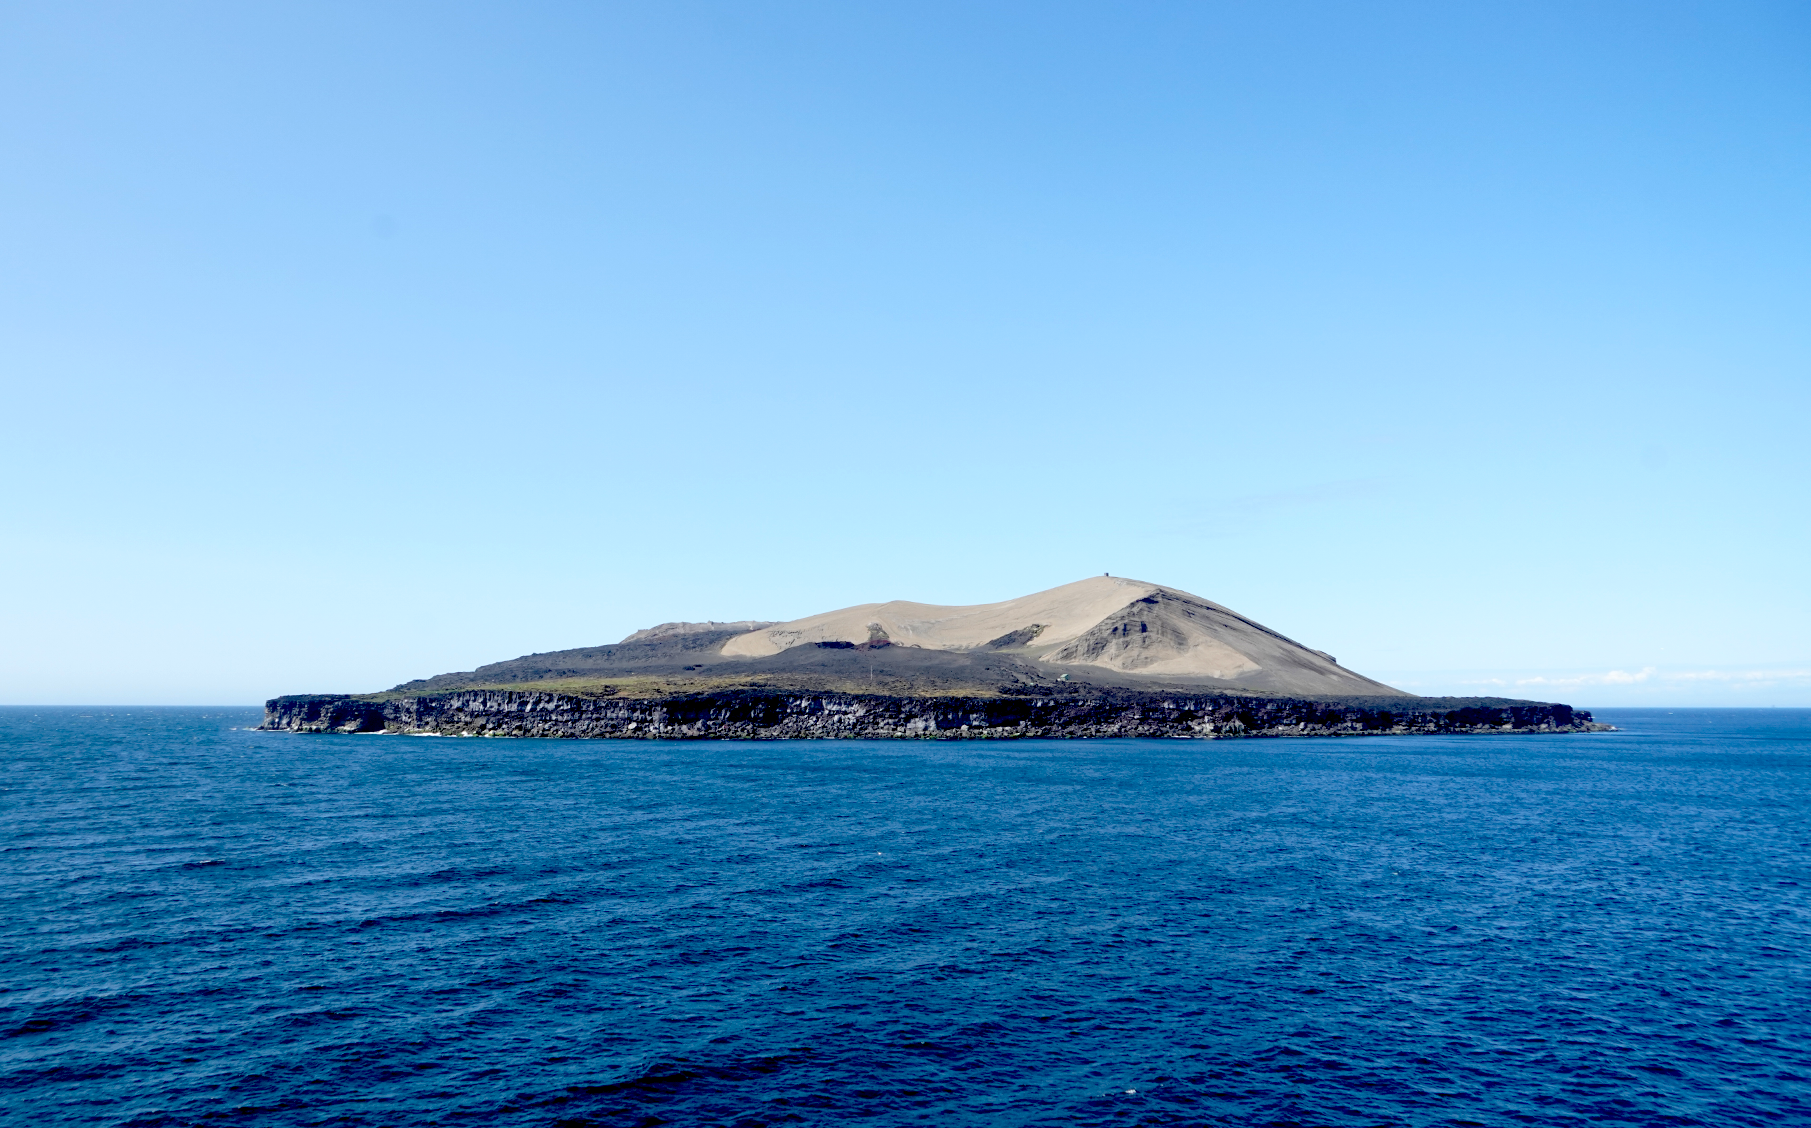 The island of Surtsey seen from the deck of the National Geographic Resolution.